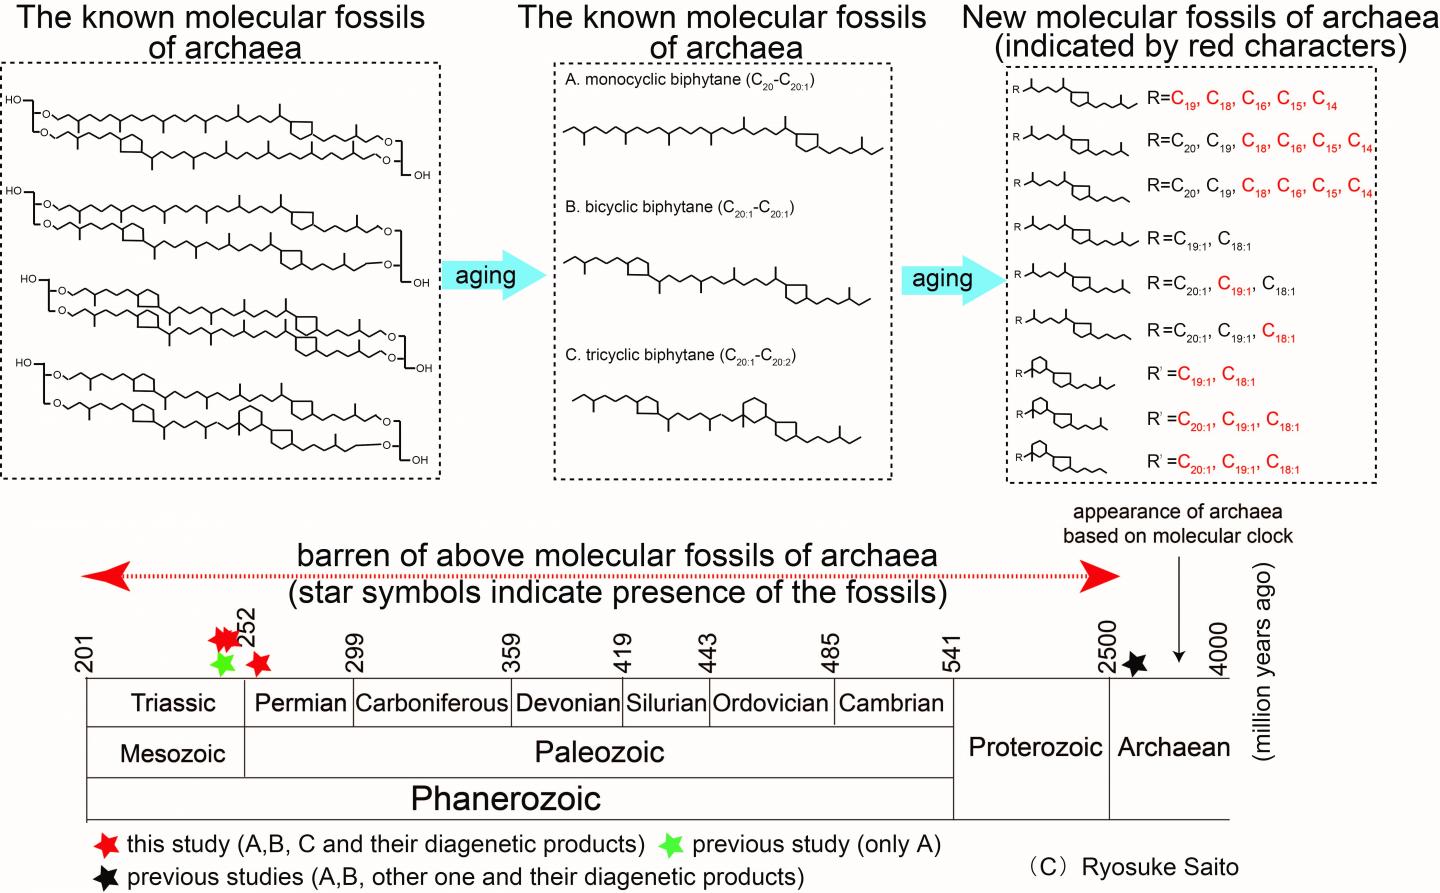 Techniques Used in Forensic Science Help Discover New Molecular Fossils (2 of 2)